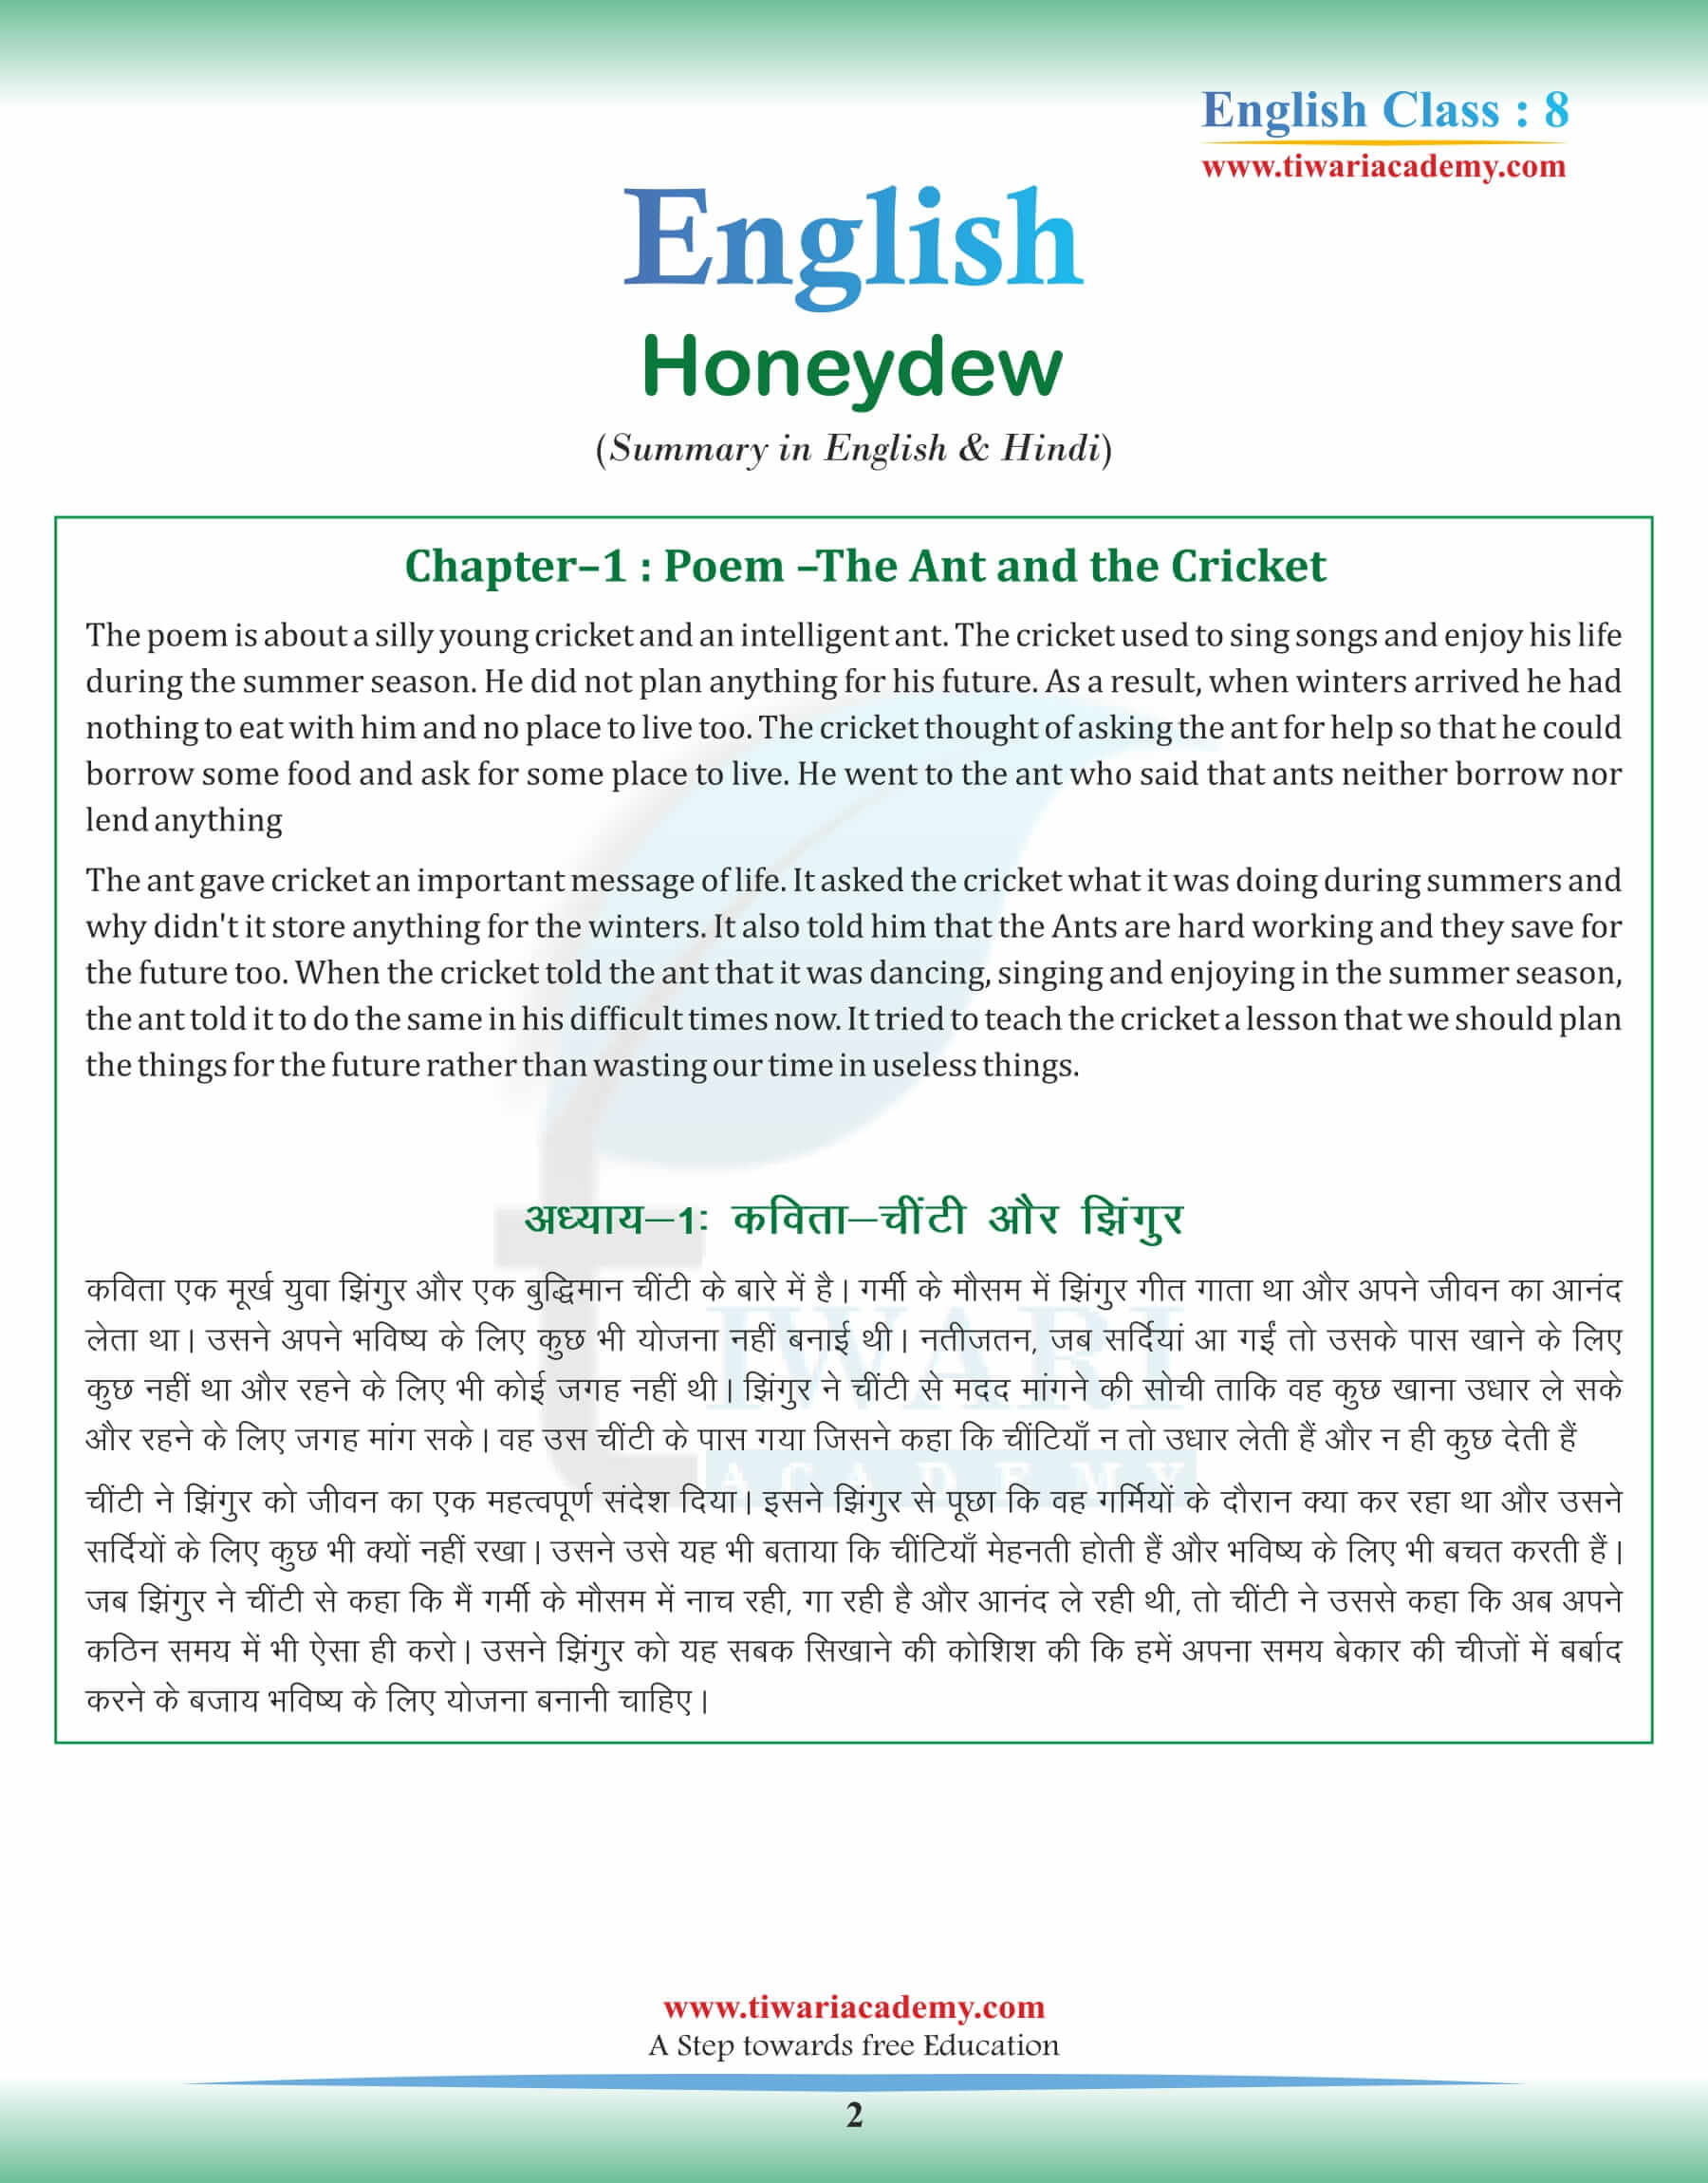 Class 8 English Chapter 1 Summary Poem in Hindi and English